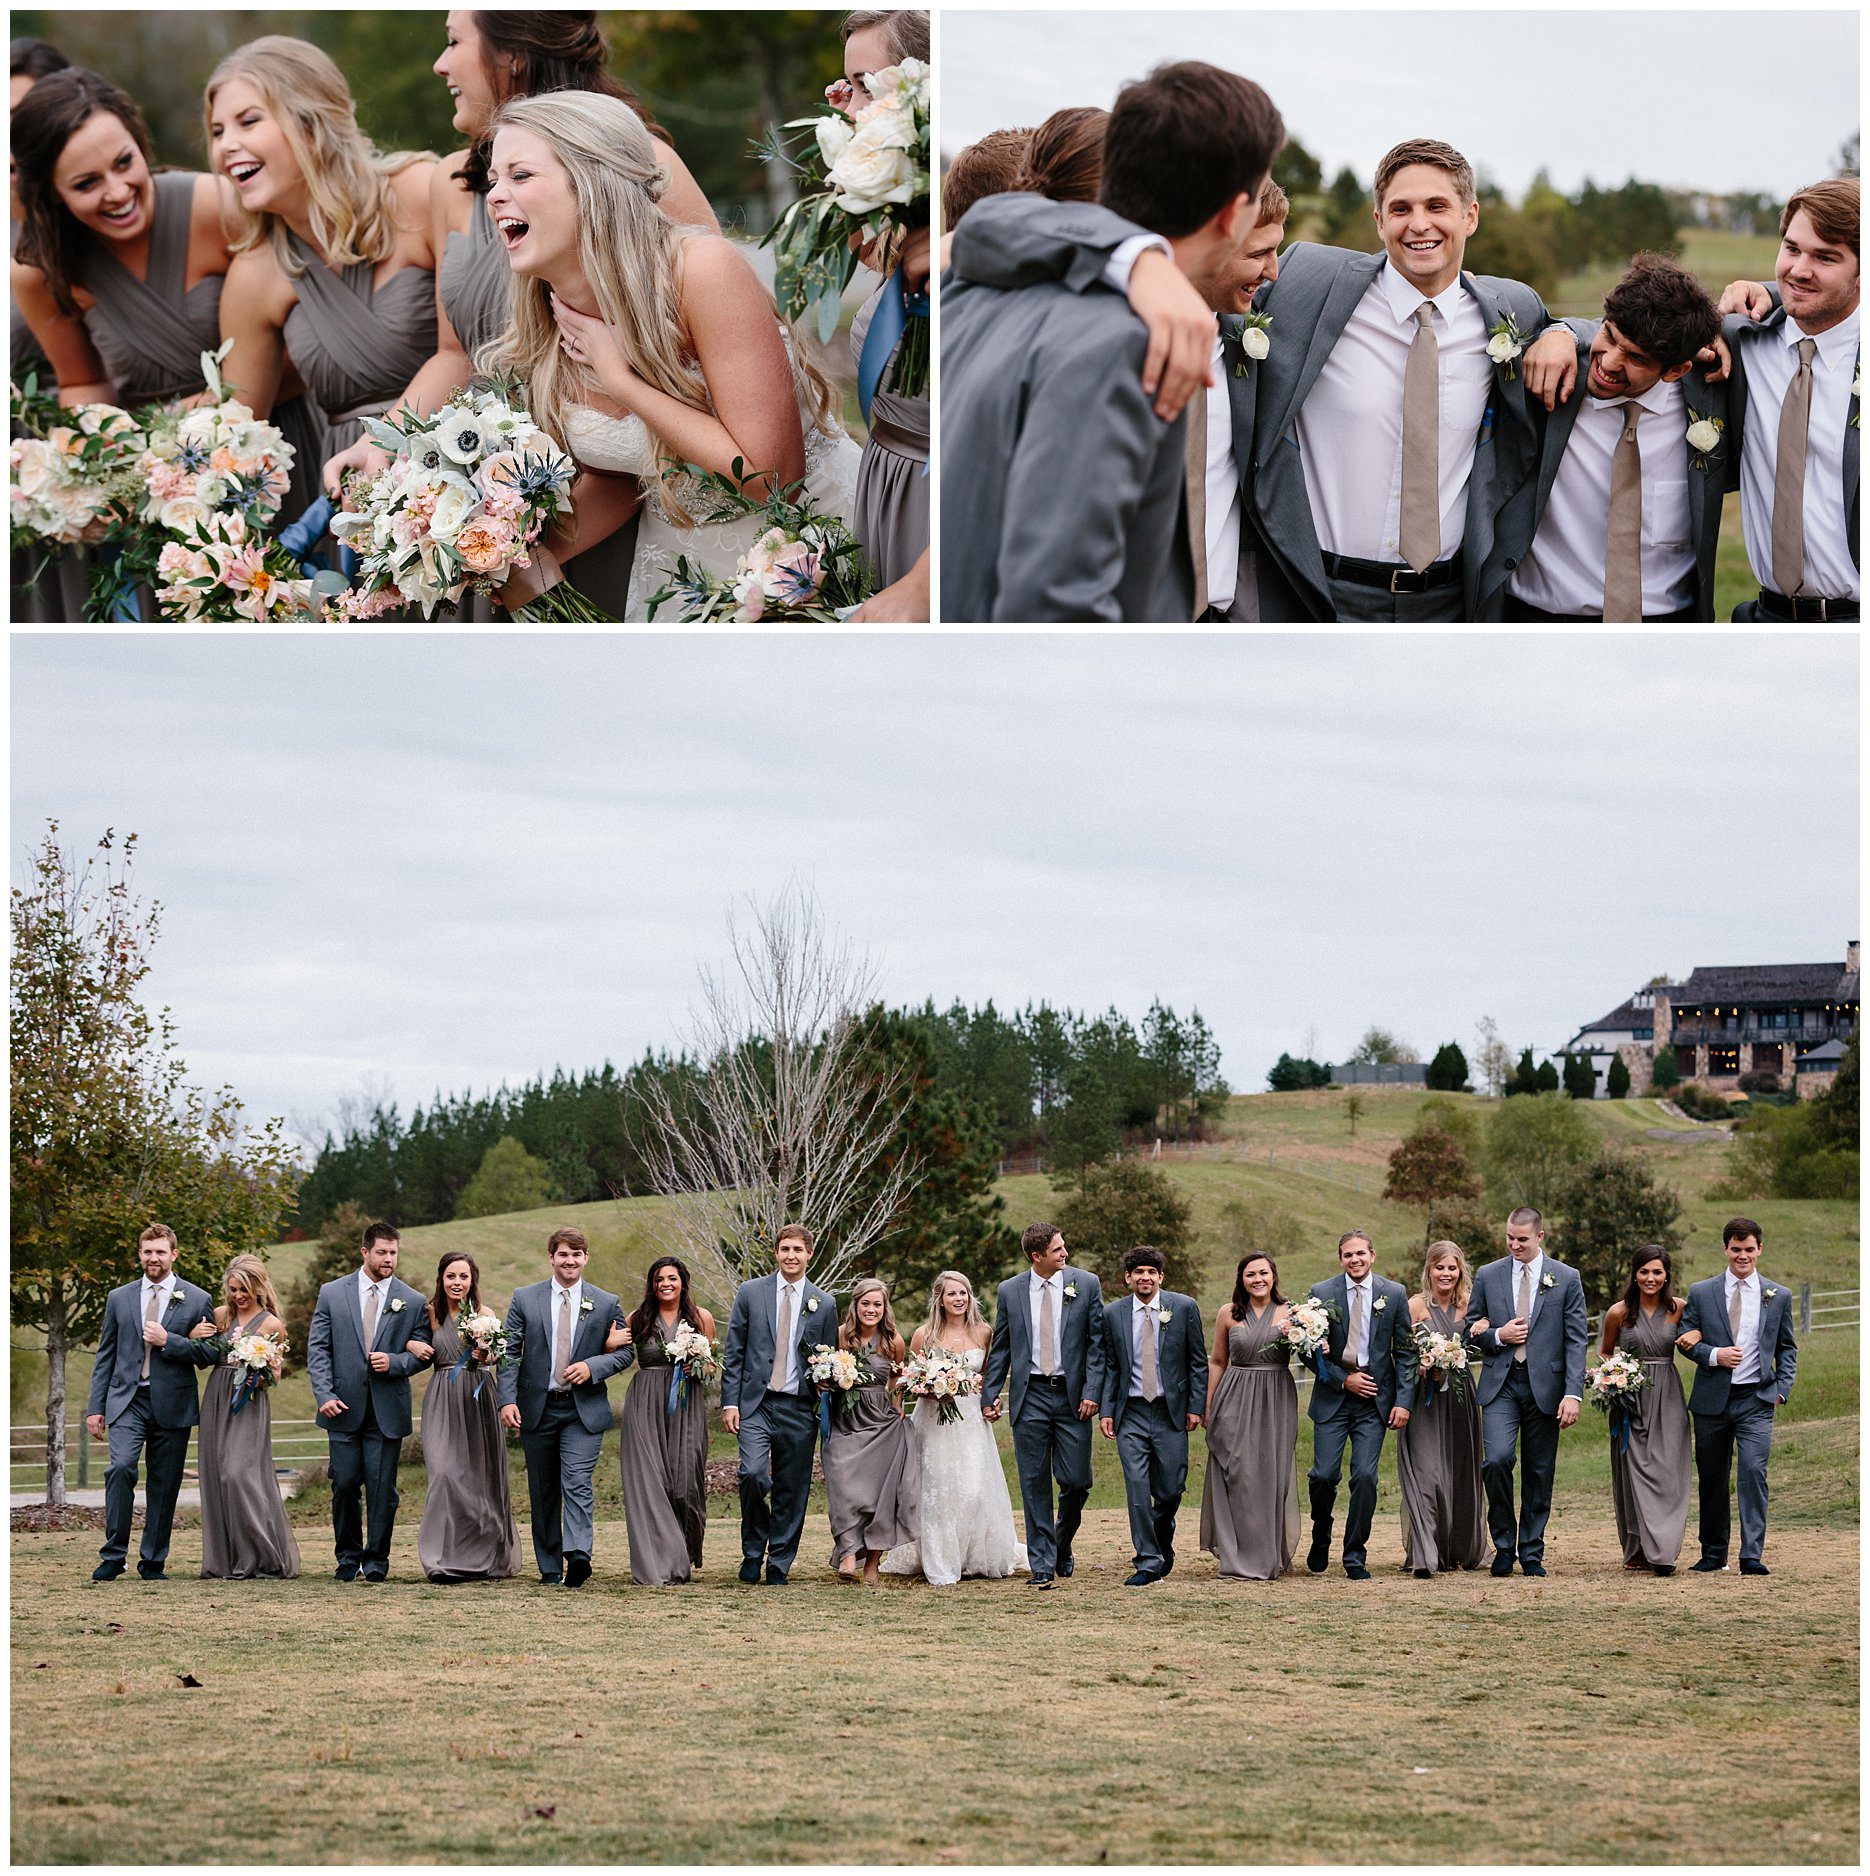 Alabama Wedding at the Stables at Russell Crossroads by Amy Little Photography